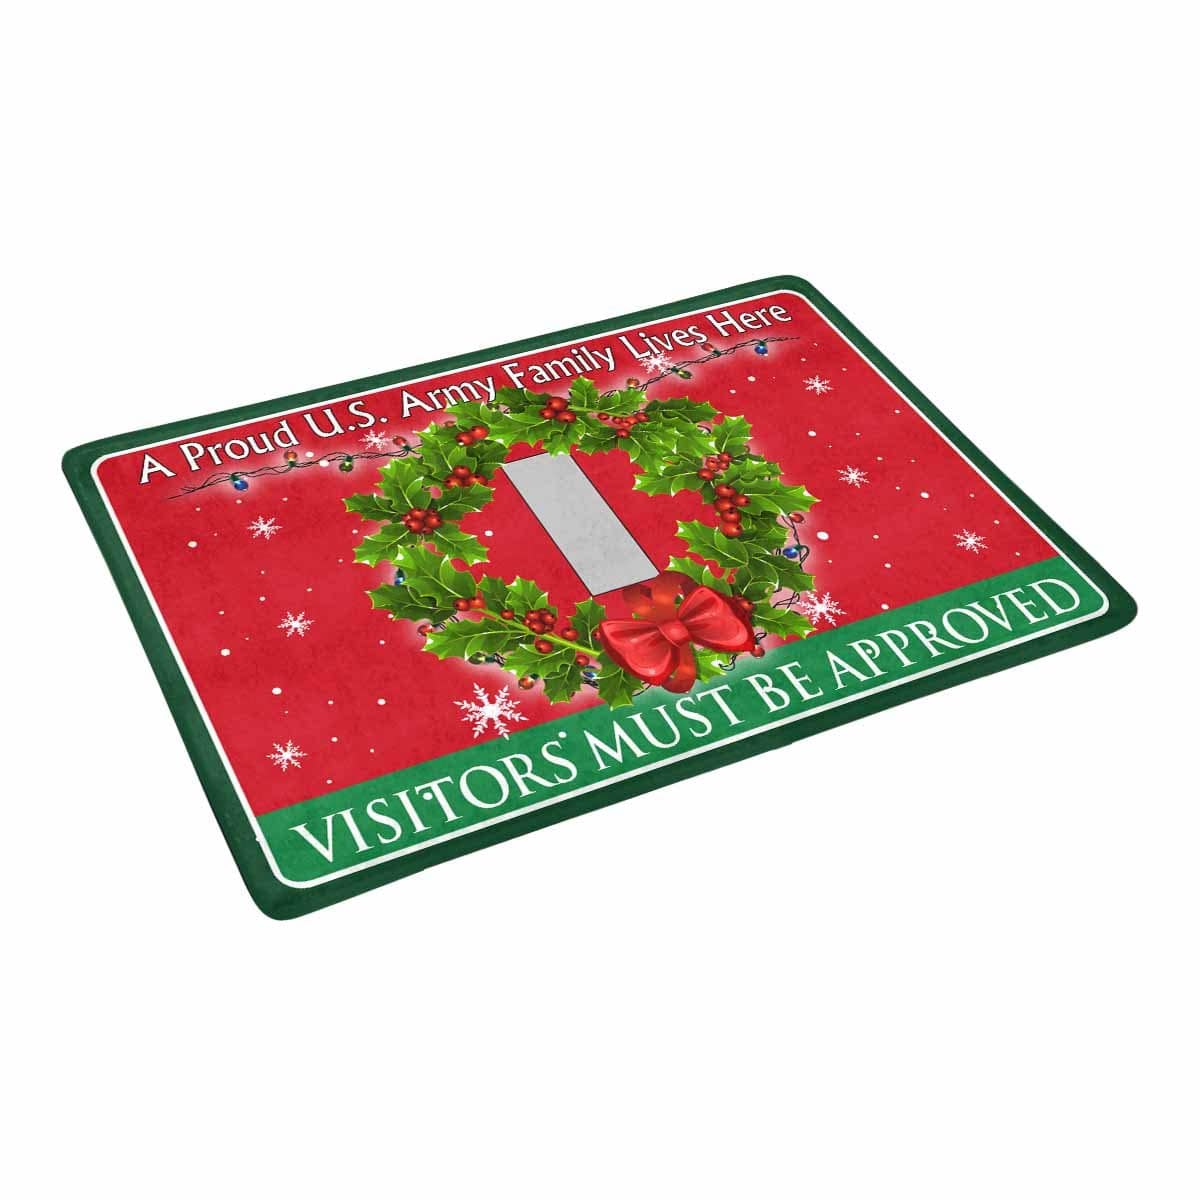 US Army O-2 First Lieutenant O2 1LT Commissioned Officer Ranks - Visitors must be approved Christmas Doormat-Doormat-Army-Ranks-Veterans Nation